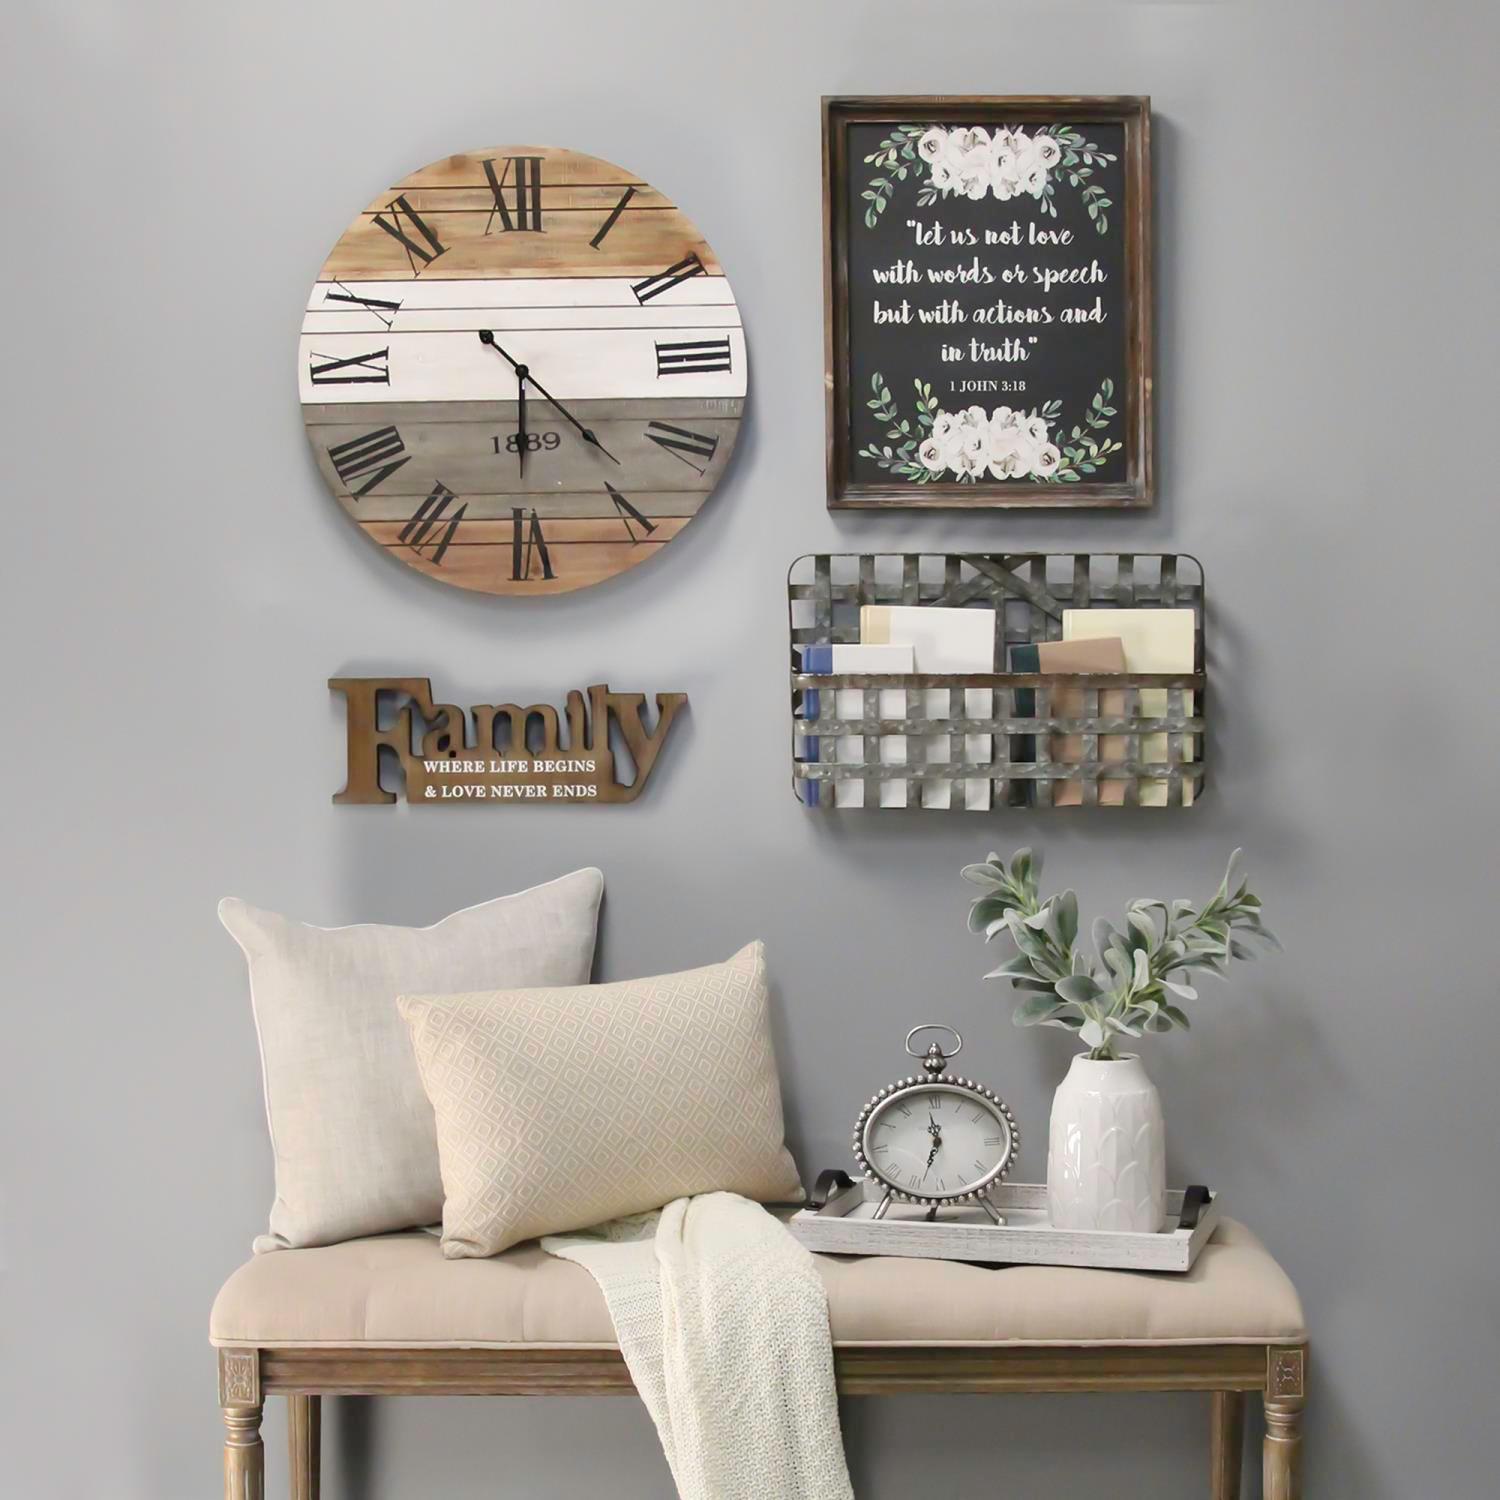 Stratton Home Decor Love With Actions And In Truth Quote Wood Wall Art S23824